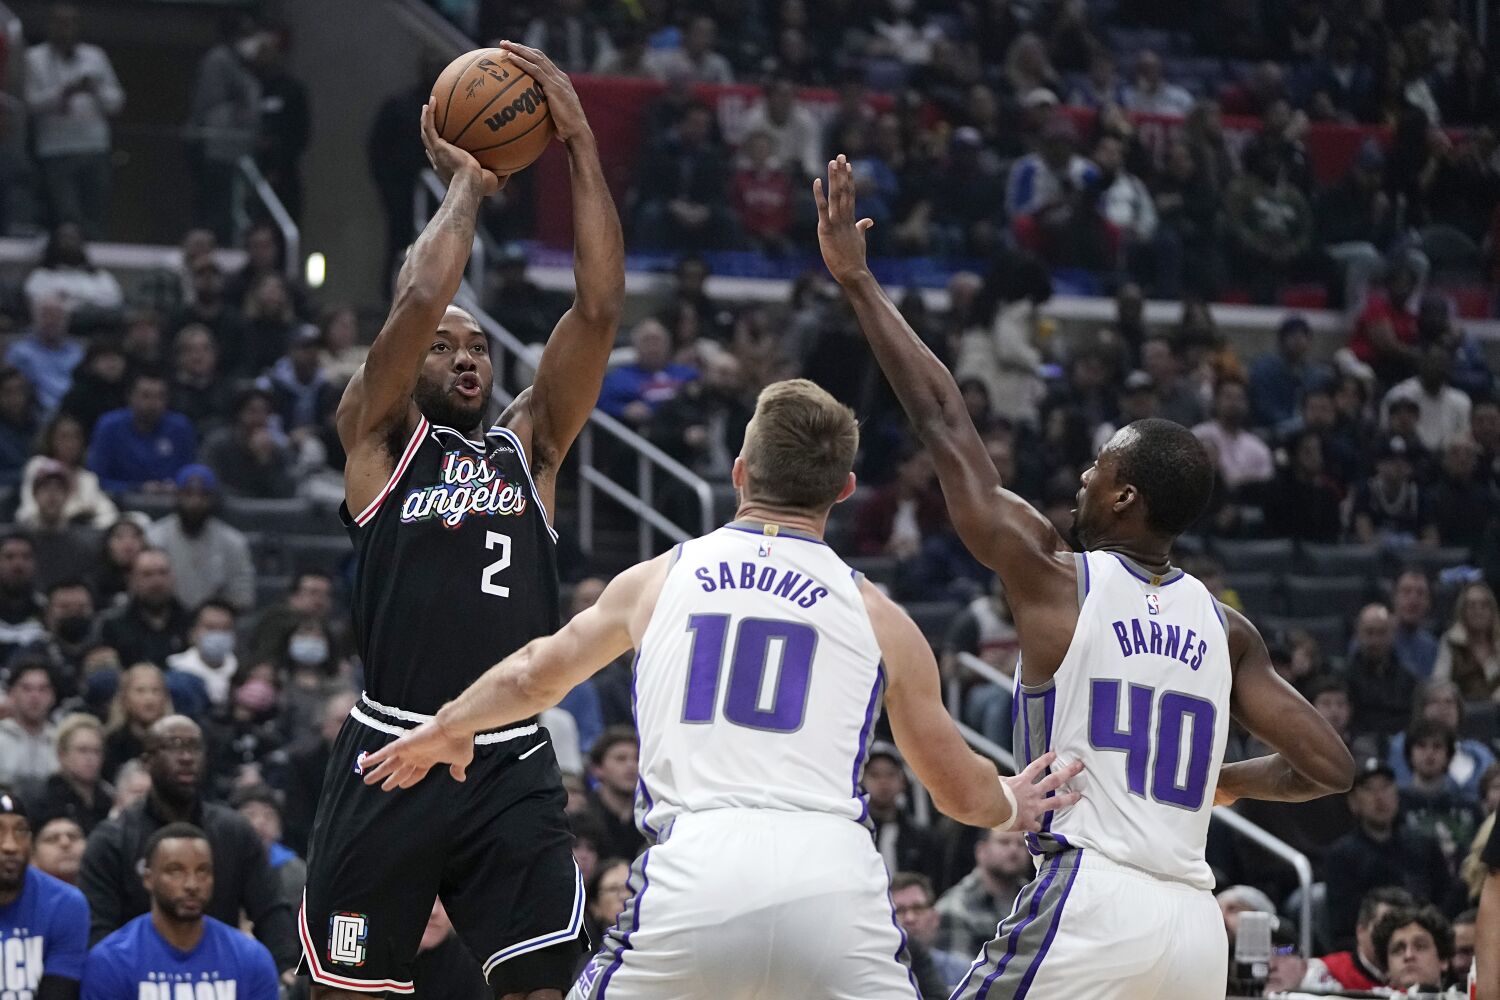 Clippers score team-record 175 points but still lose in double-OT thriller to Kings